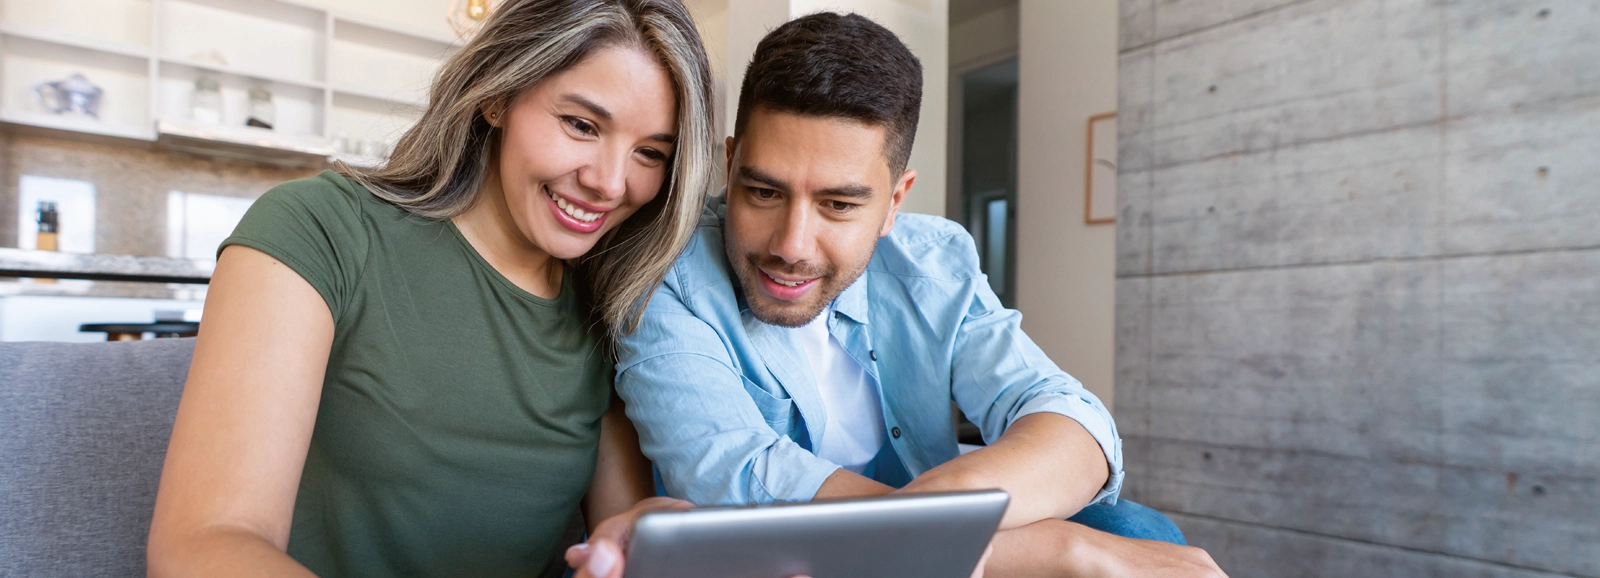 couple-looking-at-tablet-1600x578.webp